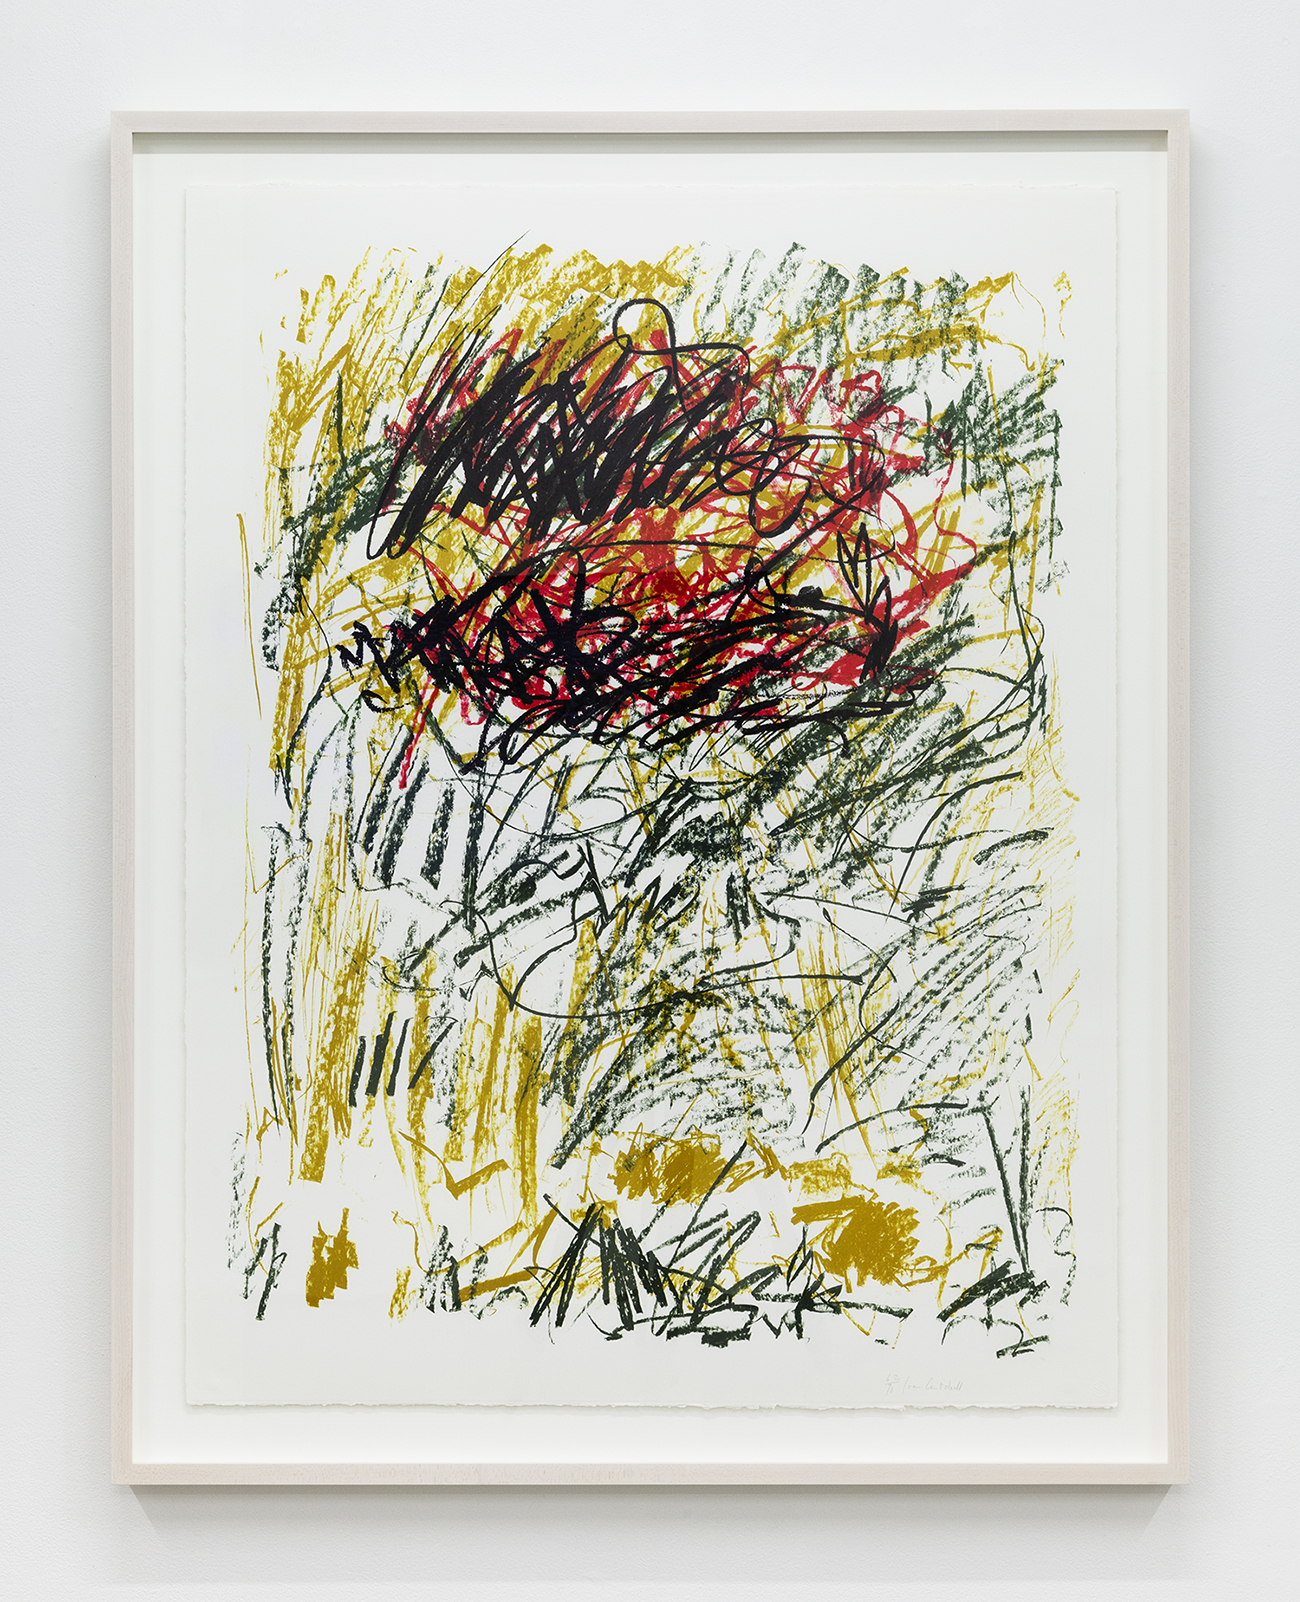 Joan Mitchell Flower III, 1981 Lithograph Image Dimensions: 42 1/2 x 32 1/2 inches (107.95 x 82.55 cm) Paper Size: 42 1/2 x 32 1/2